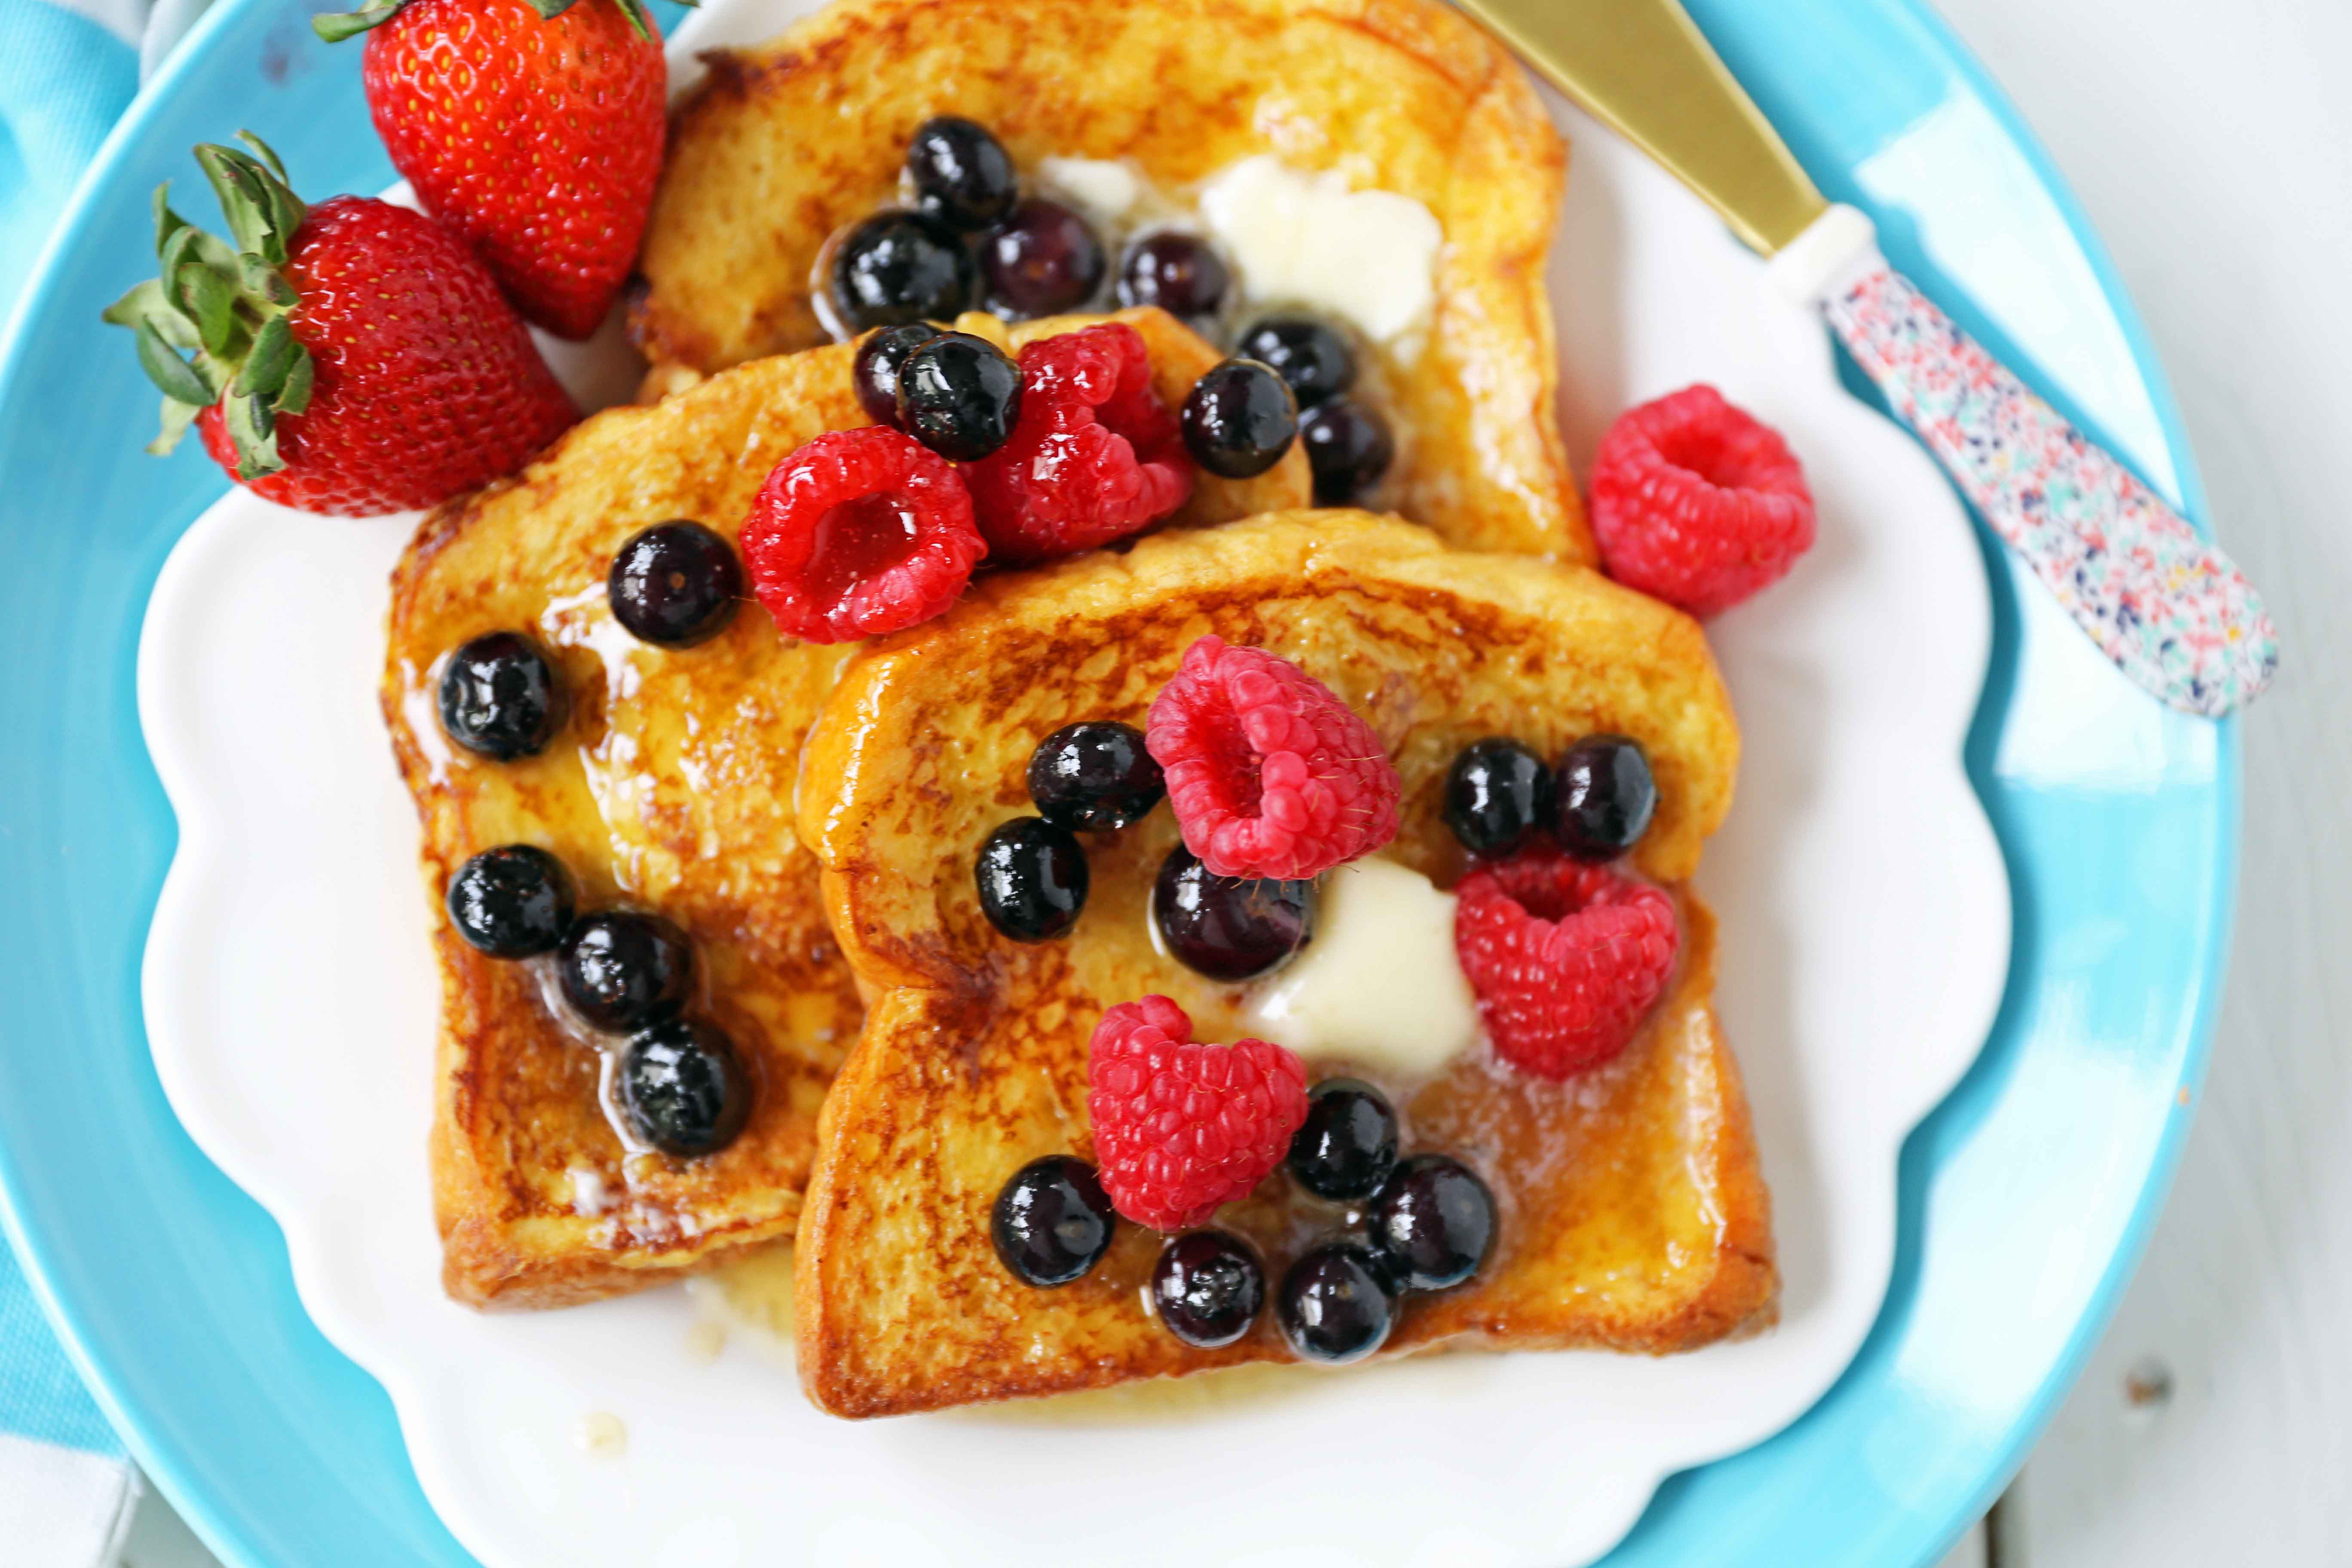 Vanilla Brioche French Toast Recipe. How to make the perfect French Toast. What type of bread to use in french toast. How to make custard for french toast. The BEST French Toast Recipe. www.modernhoney.com #frenchtoast #brioche #briochefrenchtoast #breakfast